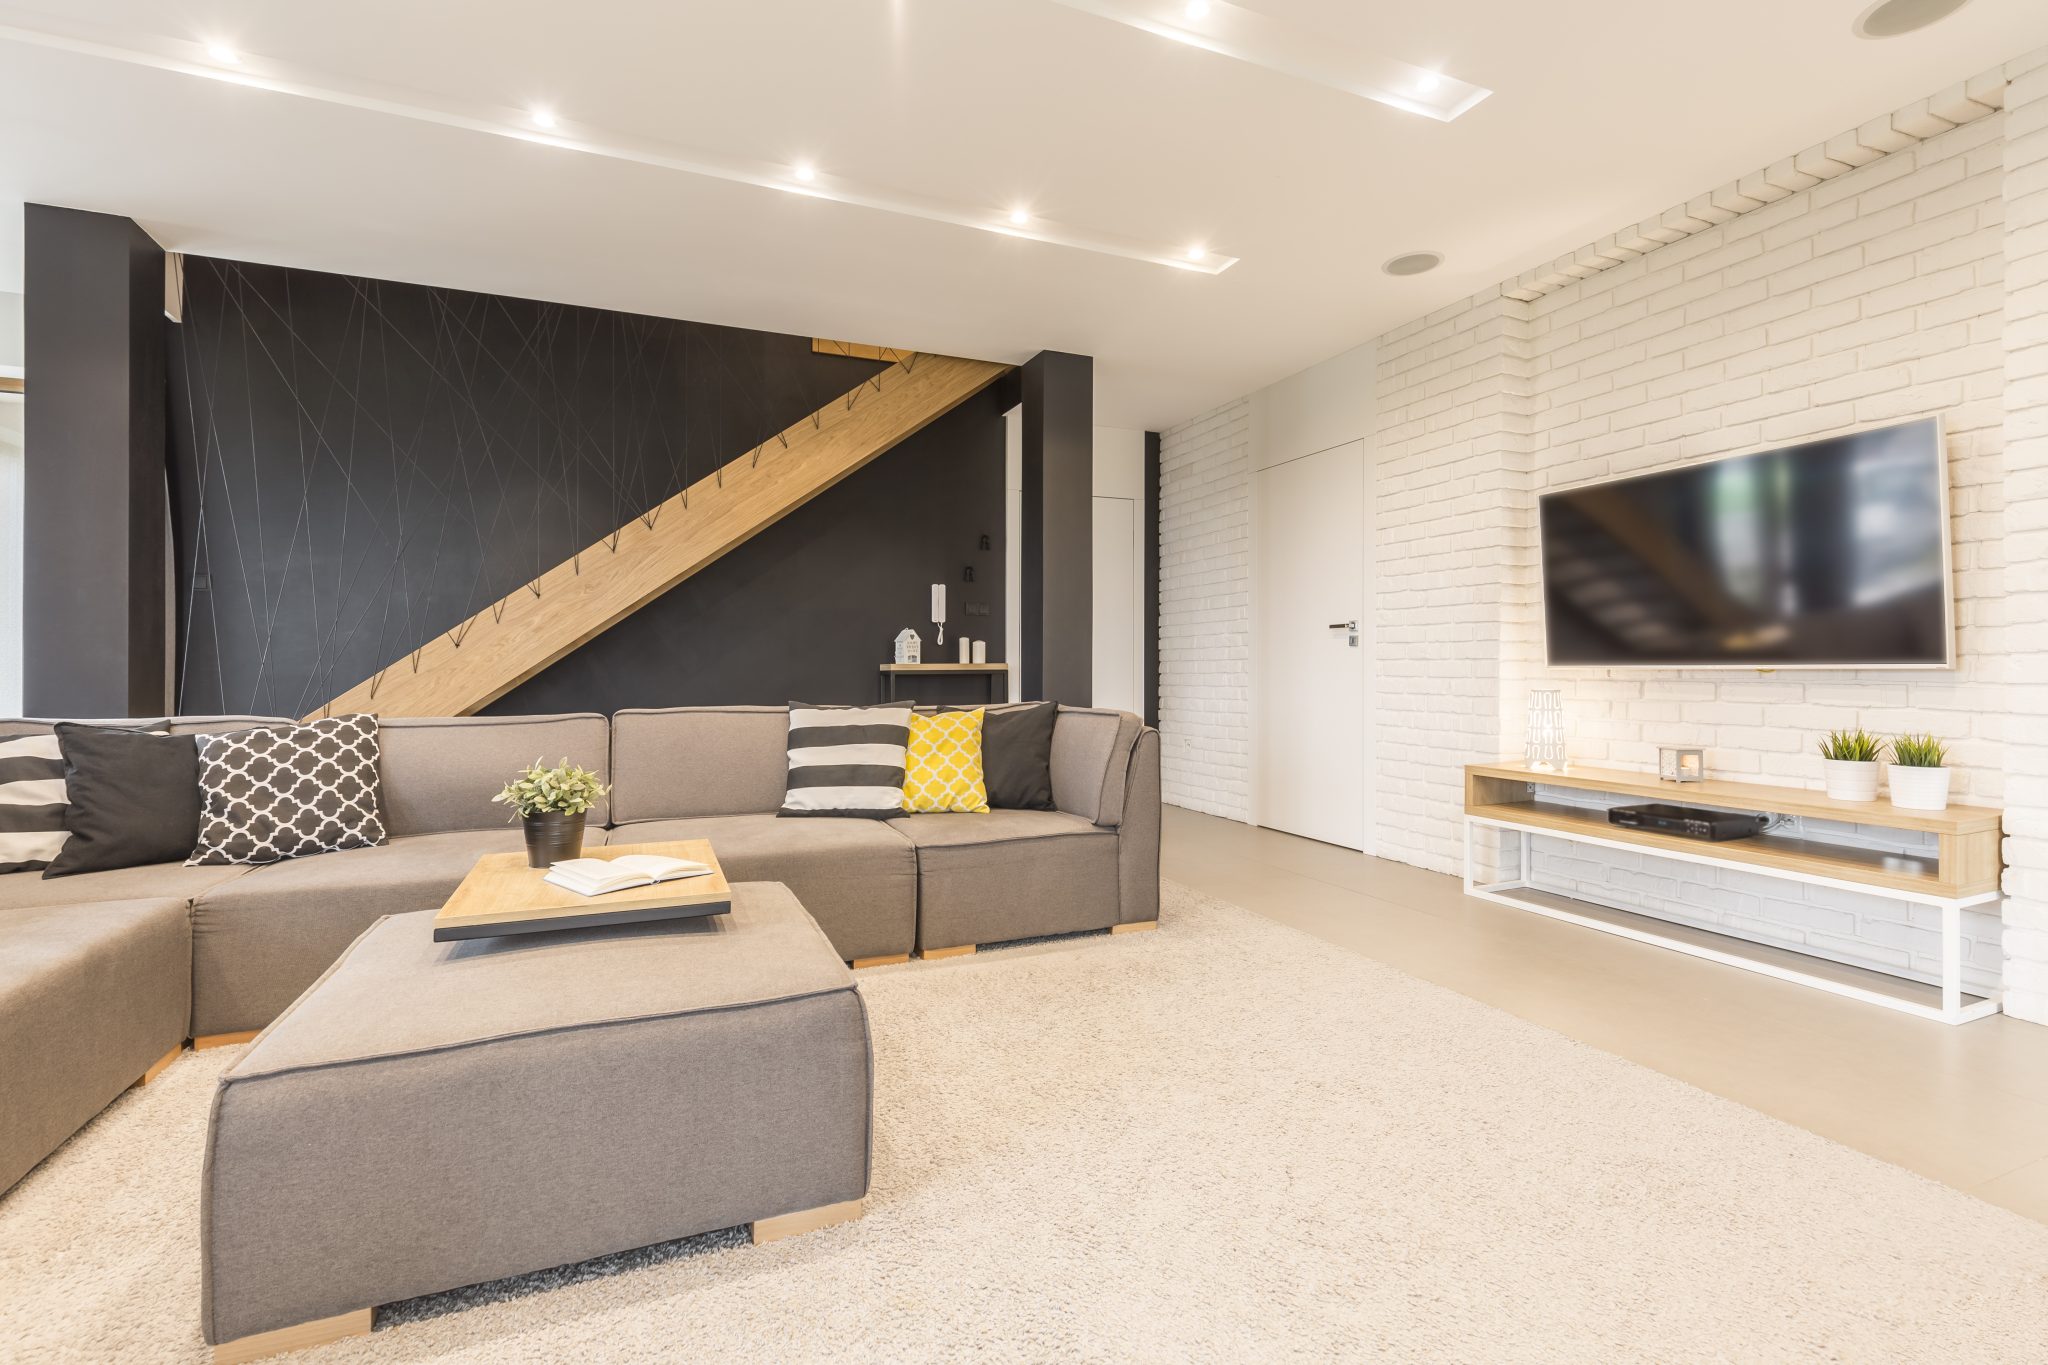 Basement living area with tv